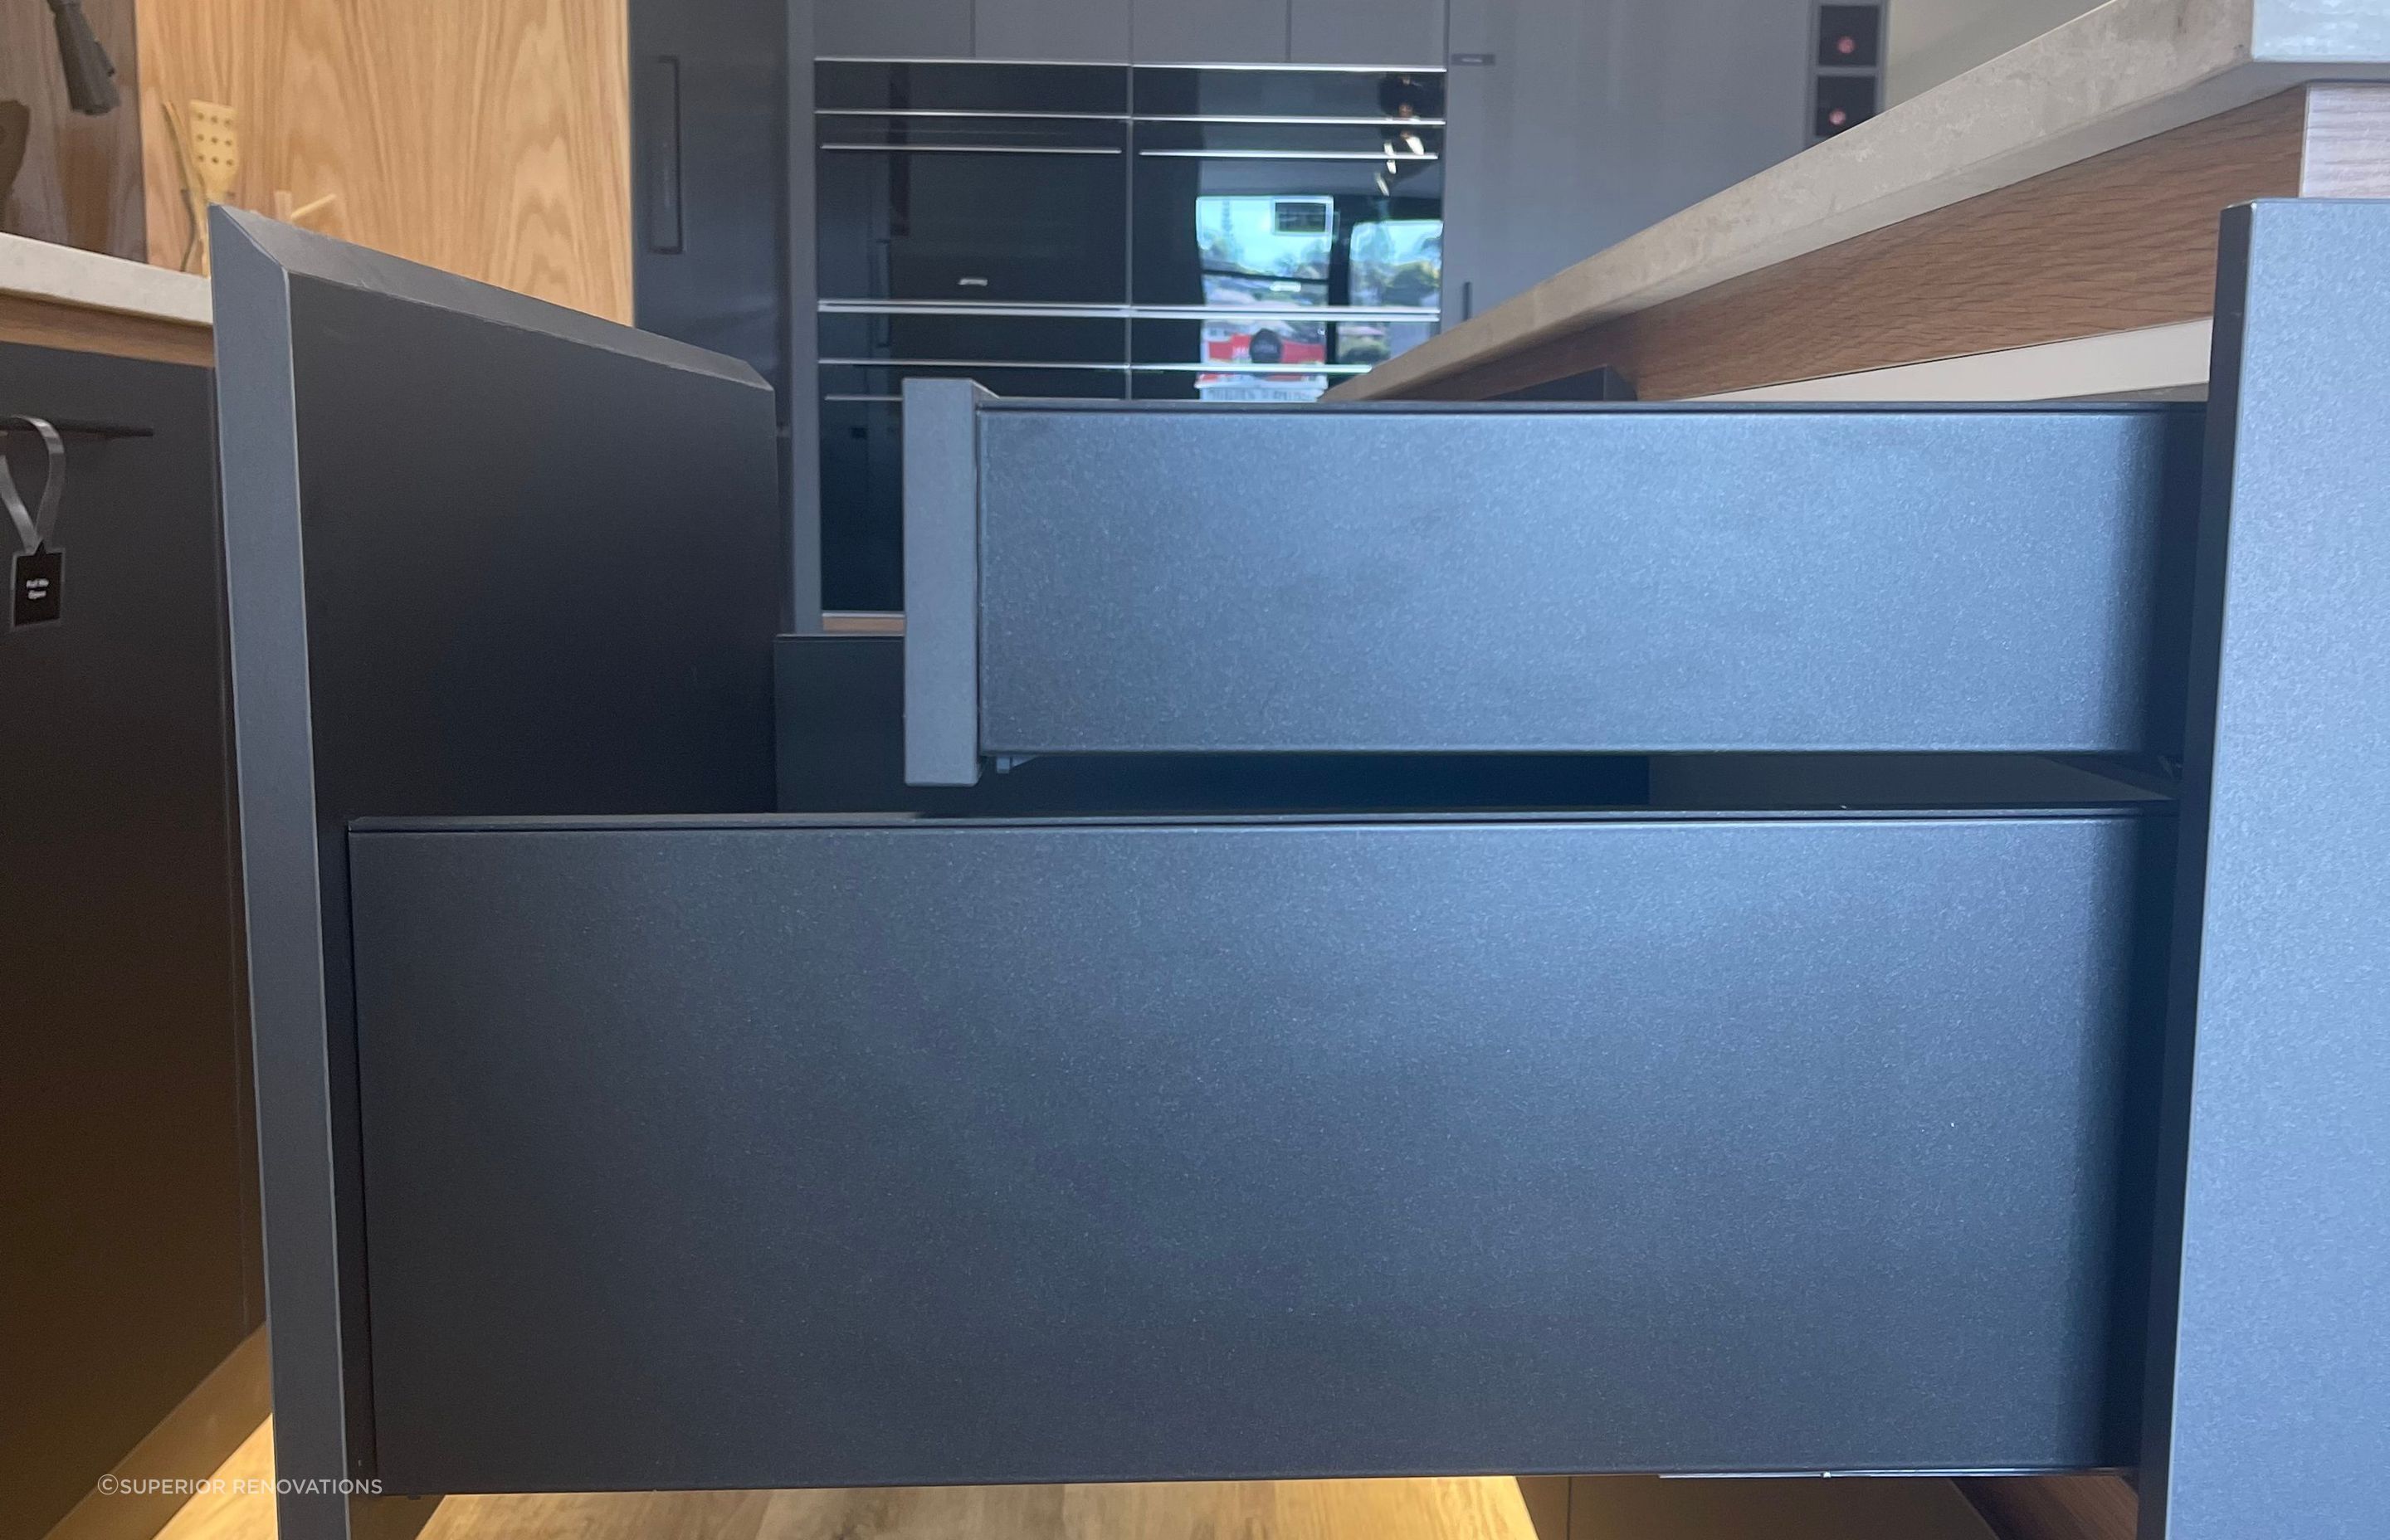 Smaller hidden drawers within the larger drawers to create an even and seamless look from the exterior.